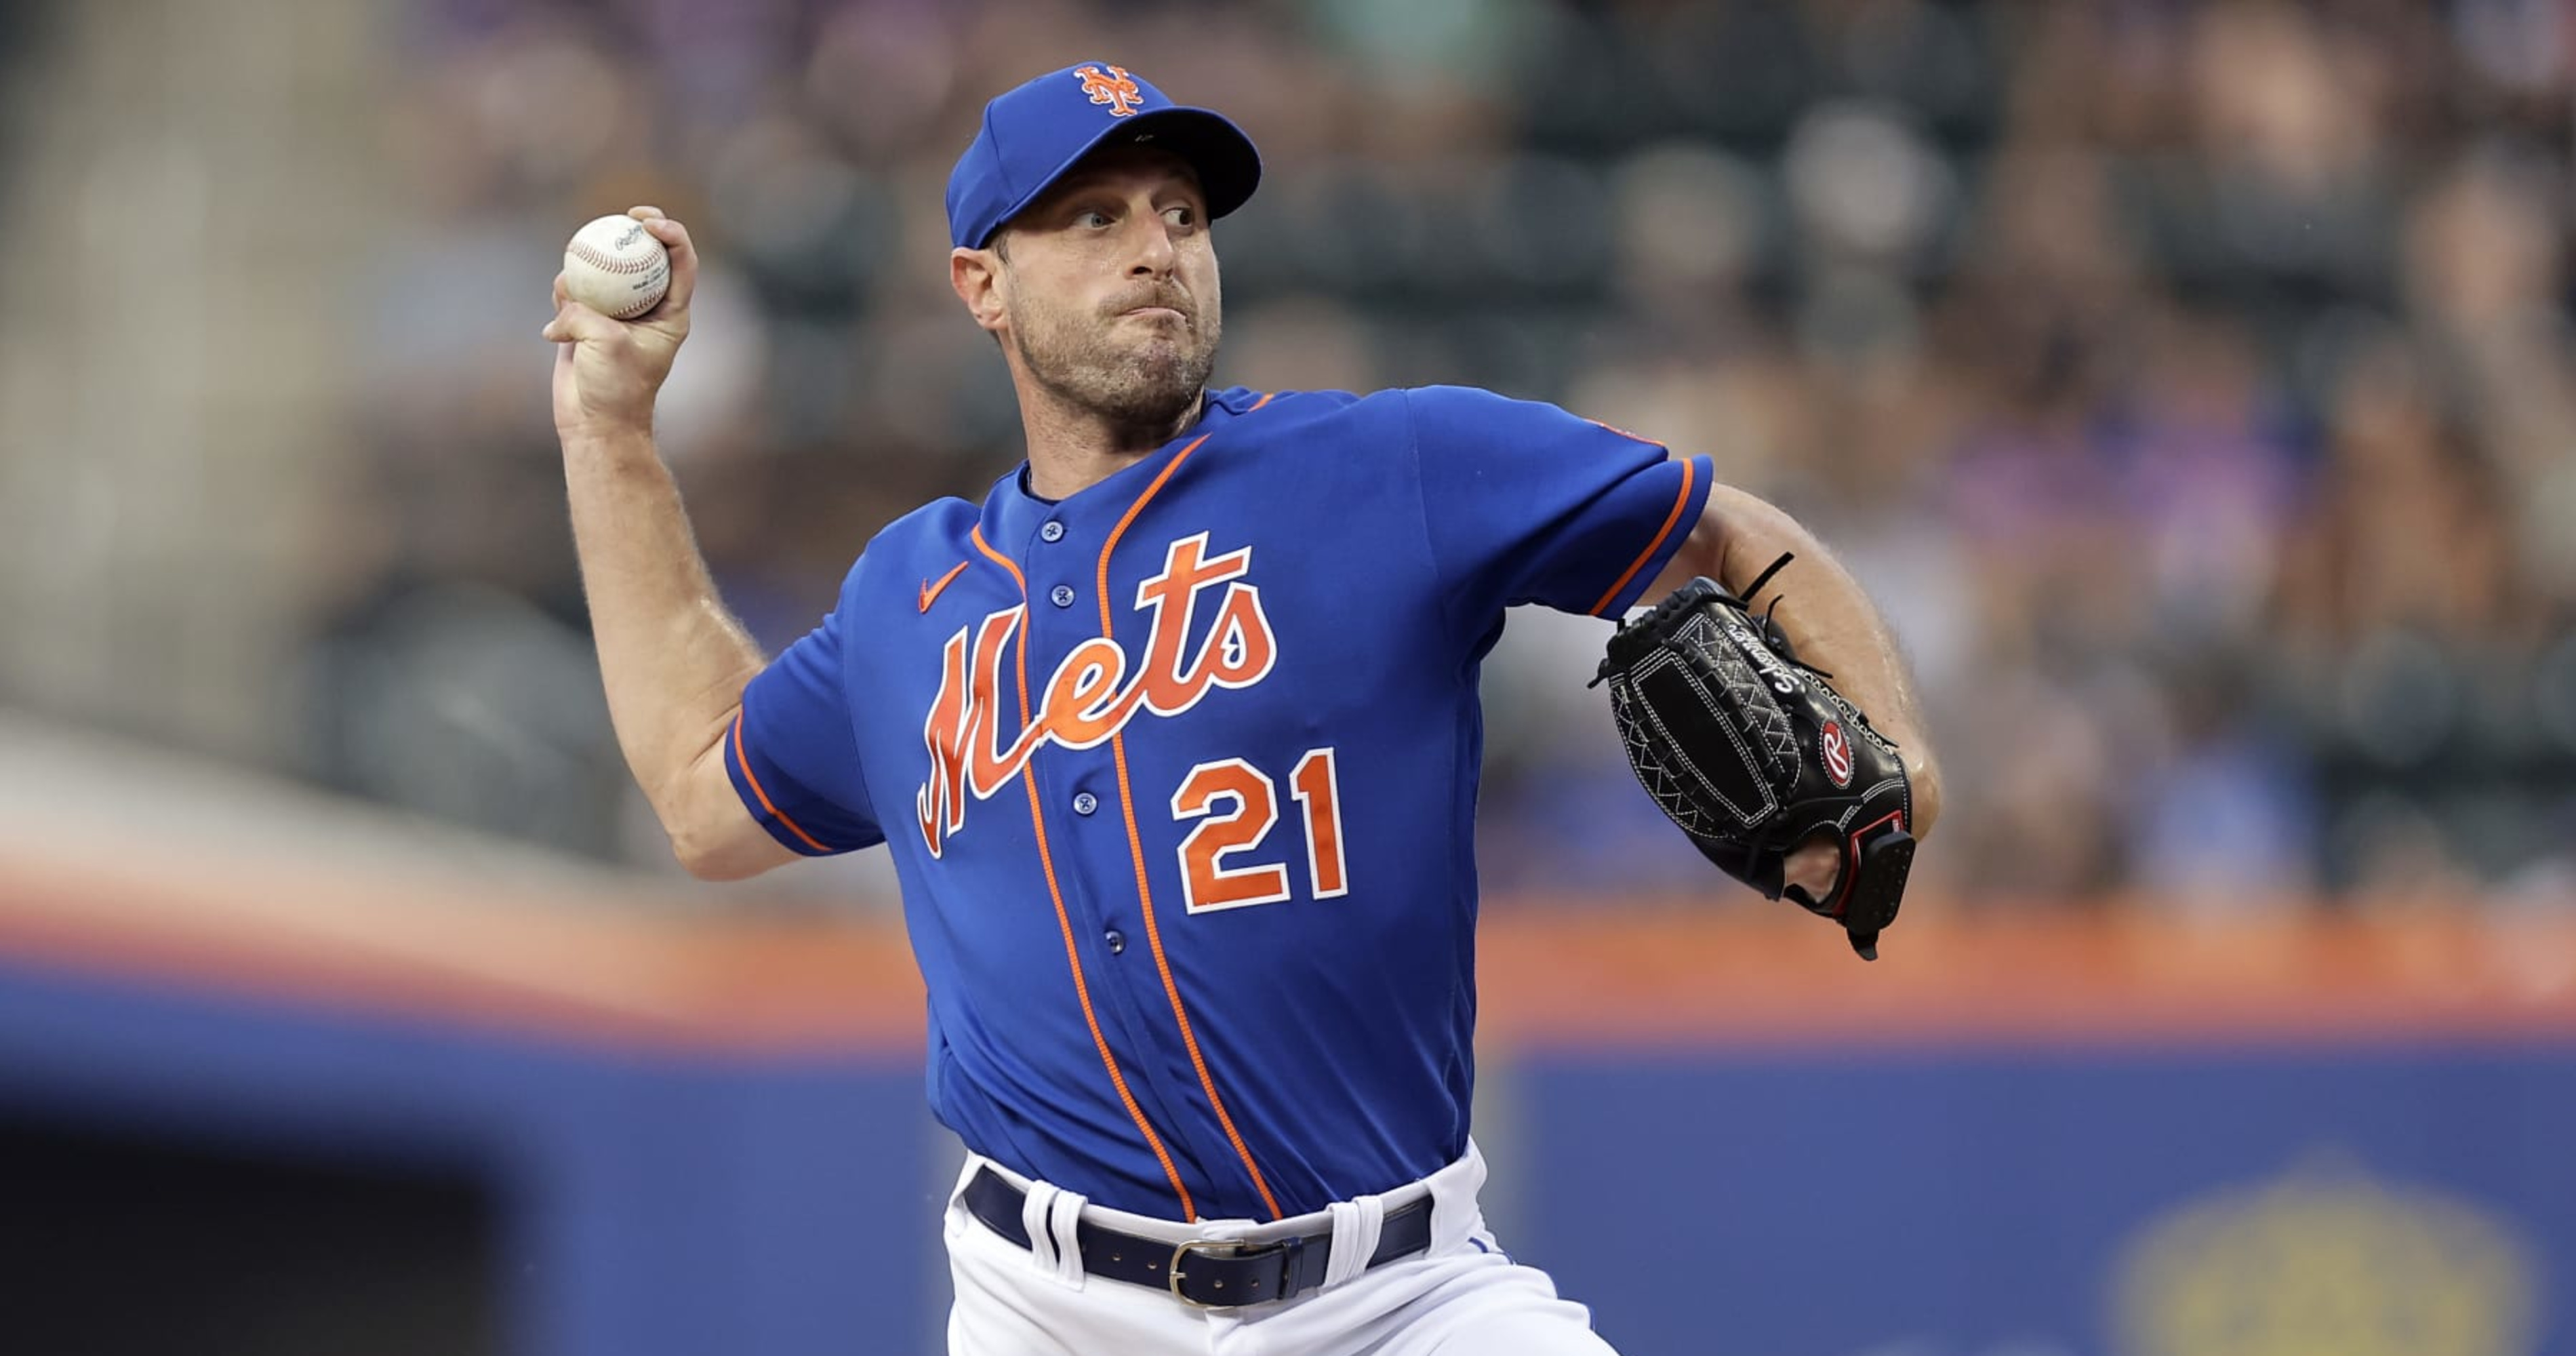 Rangers In Serious Talks With Mets About Max Scherzer Trade